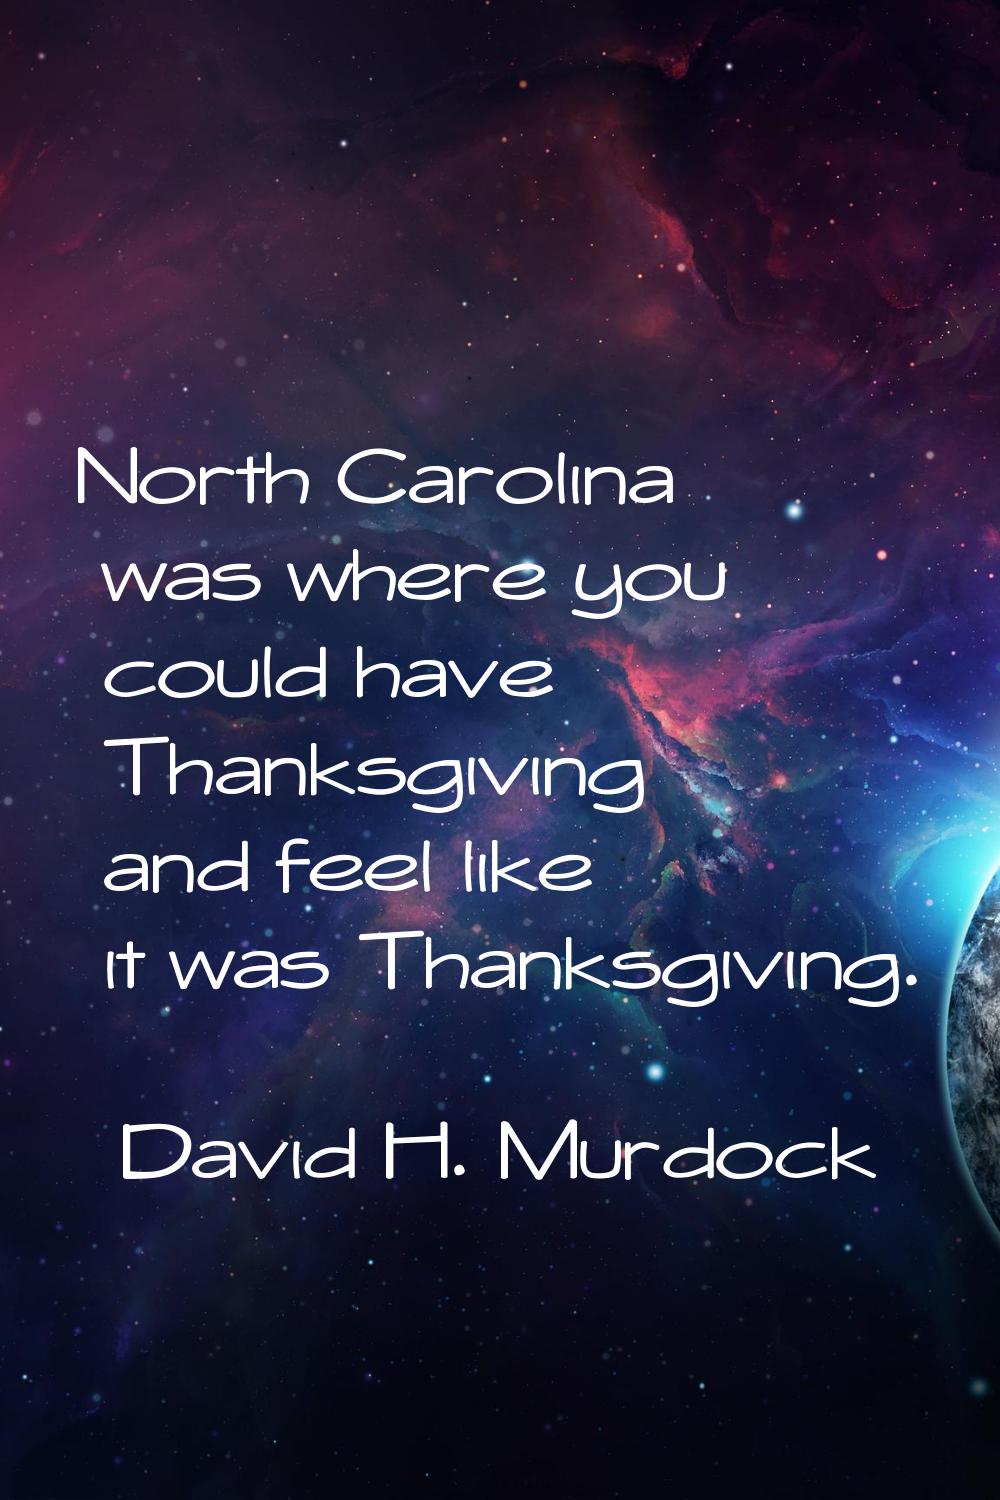 North Carolina was where you could have Thanksgiving and feel like it was Thanksgiving.